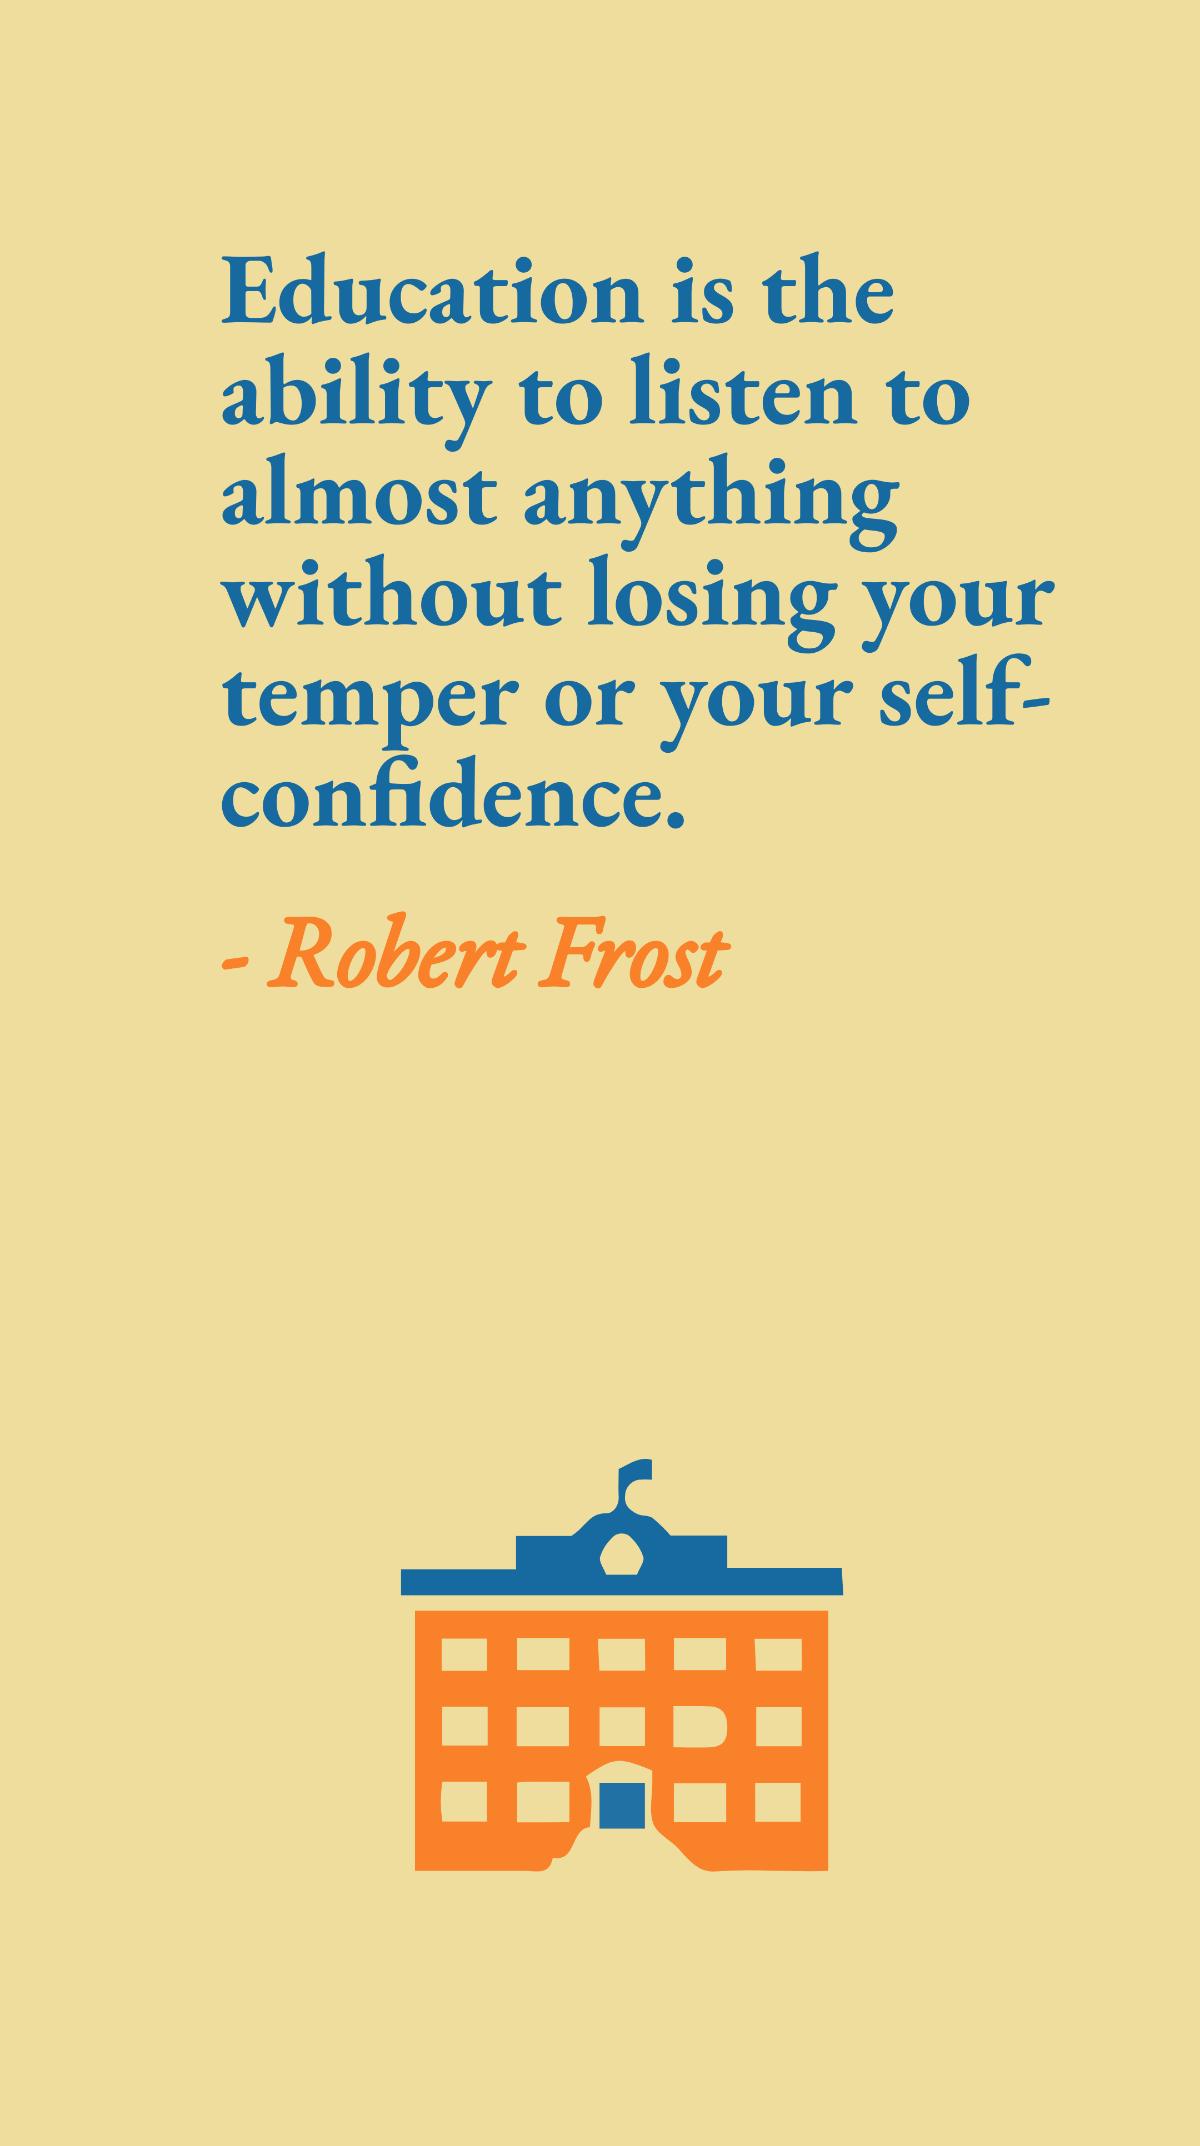 Robert Frost - Education is the ability to listen to almost anything without losing your temper or your self-confidence.